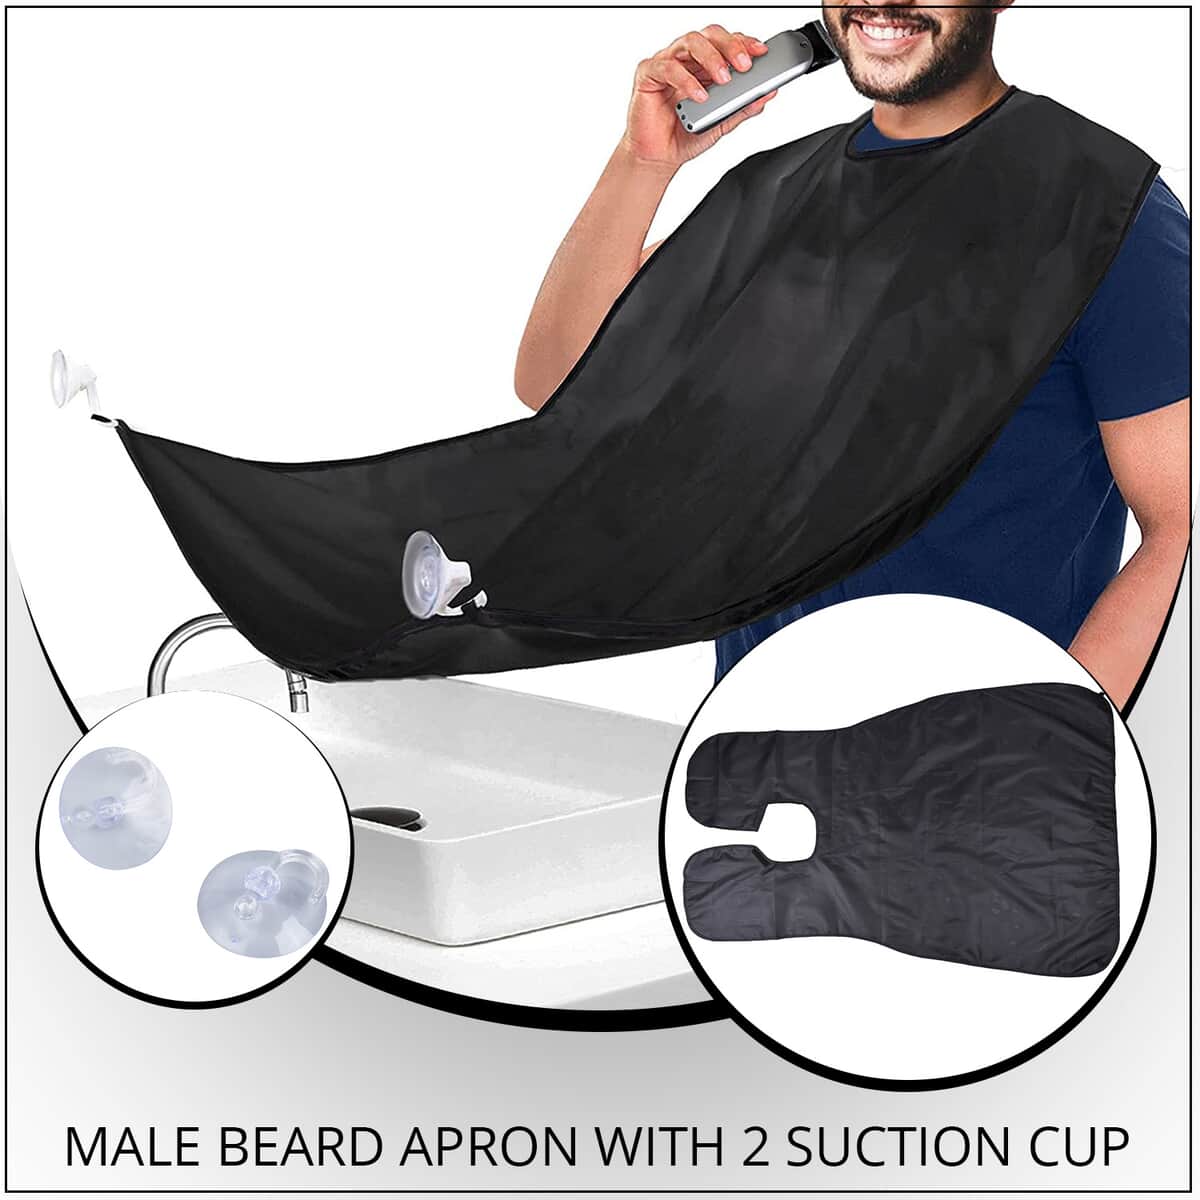 Male Beard Apron with 2 Suction Cup - Black (29"x43.3") image number 1